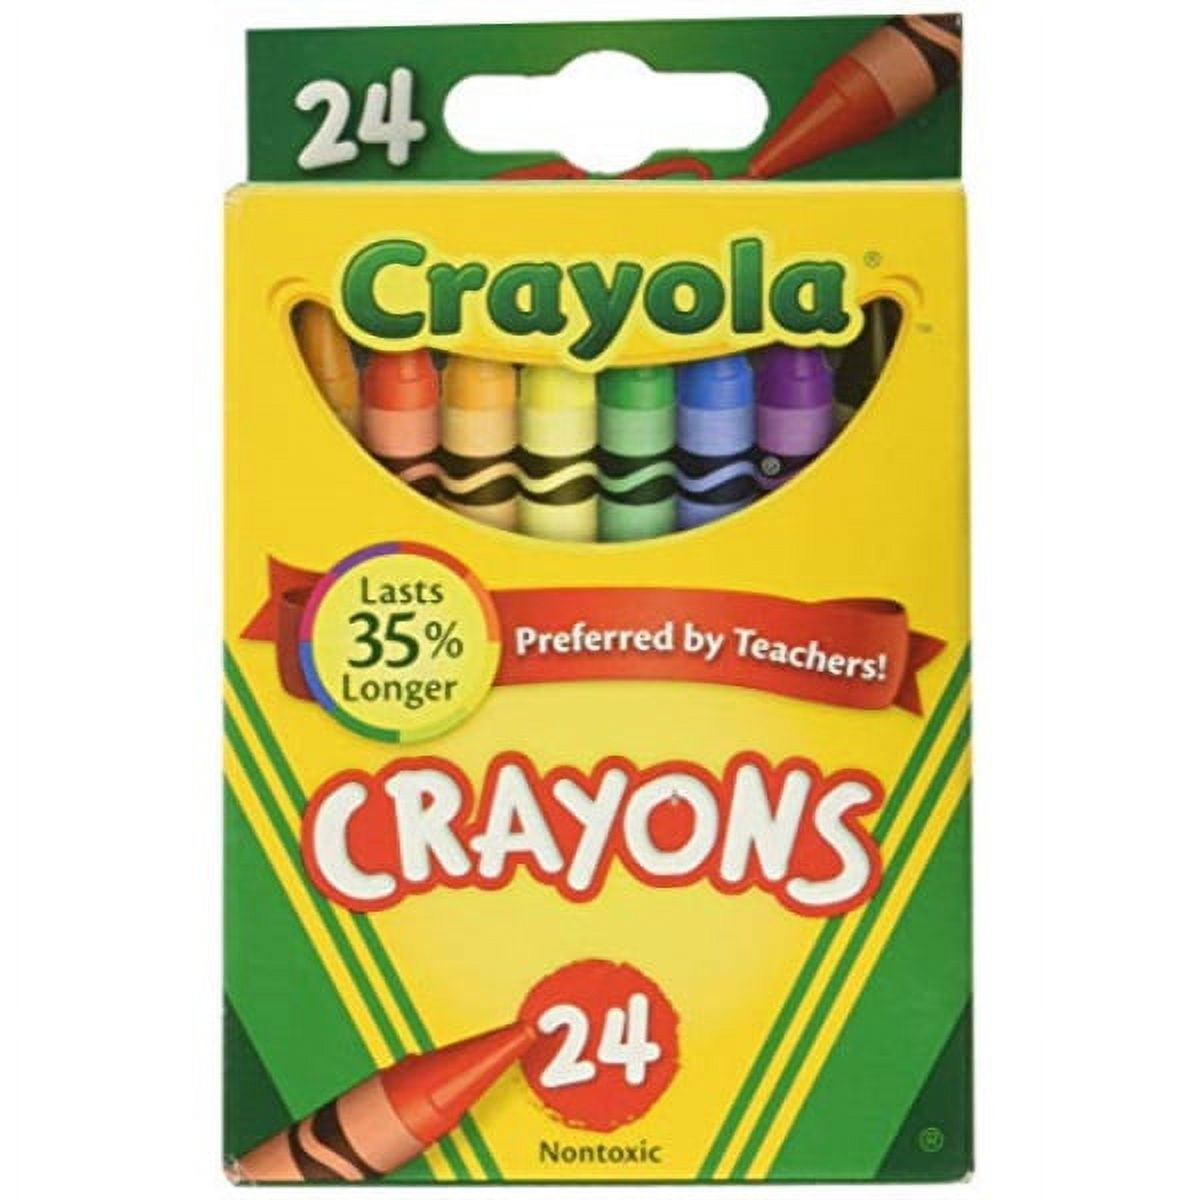 6 Packs: 24 ct. (144 total) Crayola® Colors of the World Colored Pencils